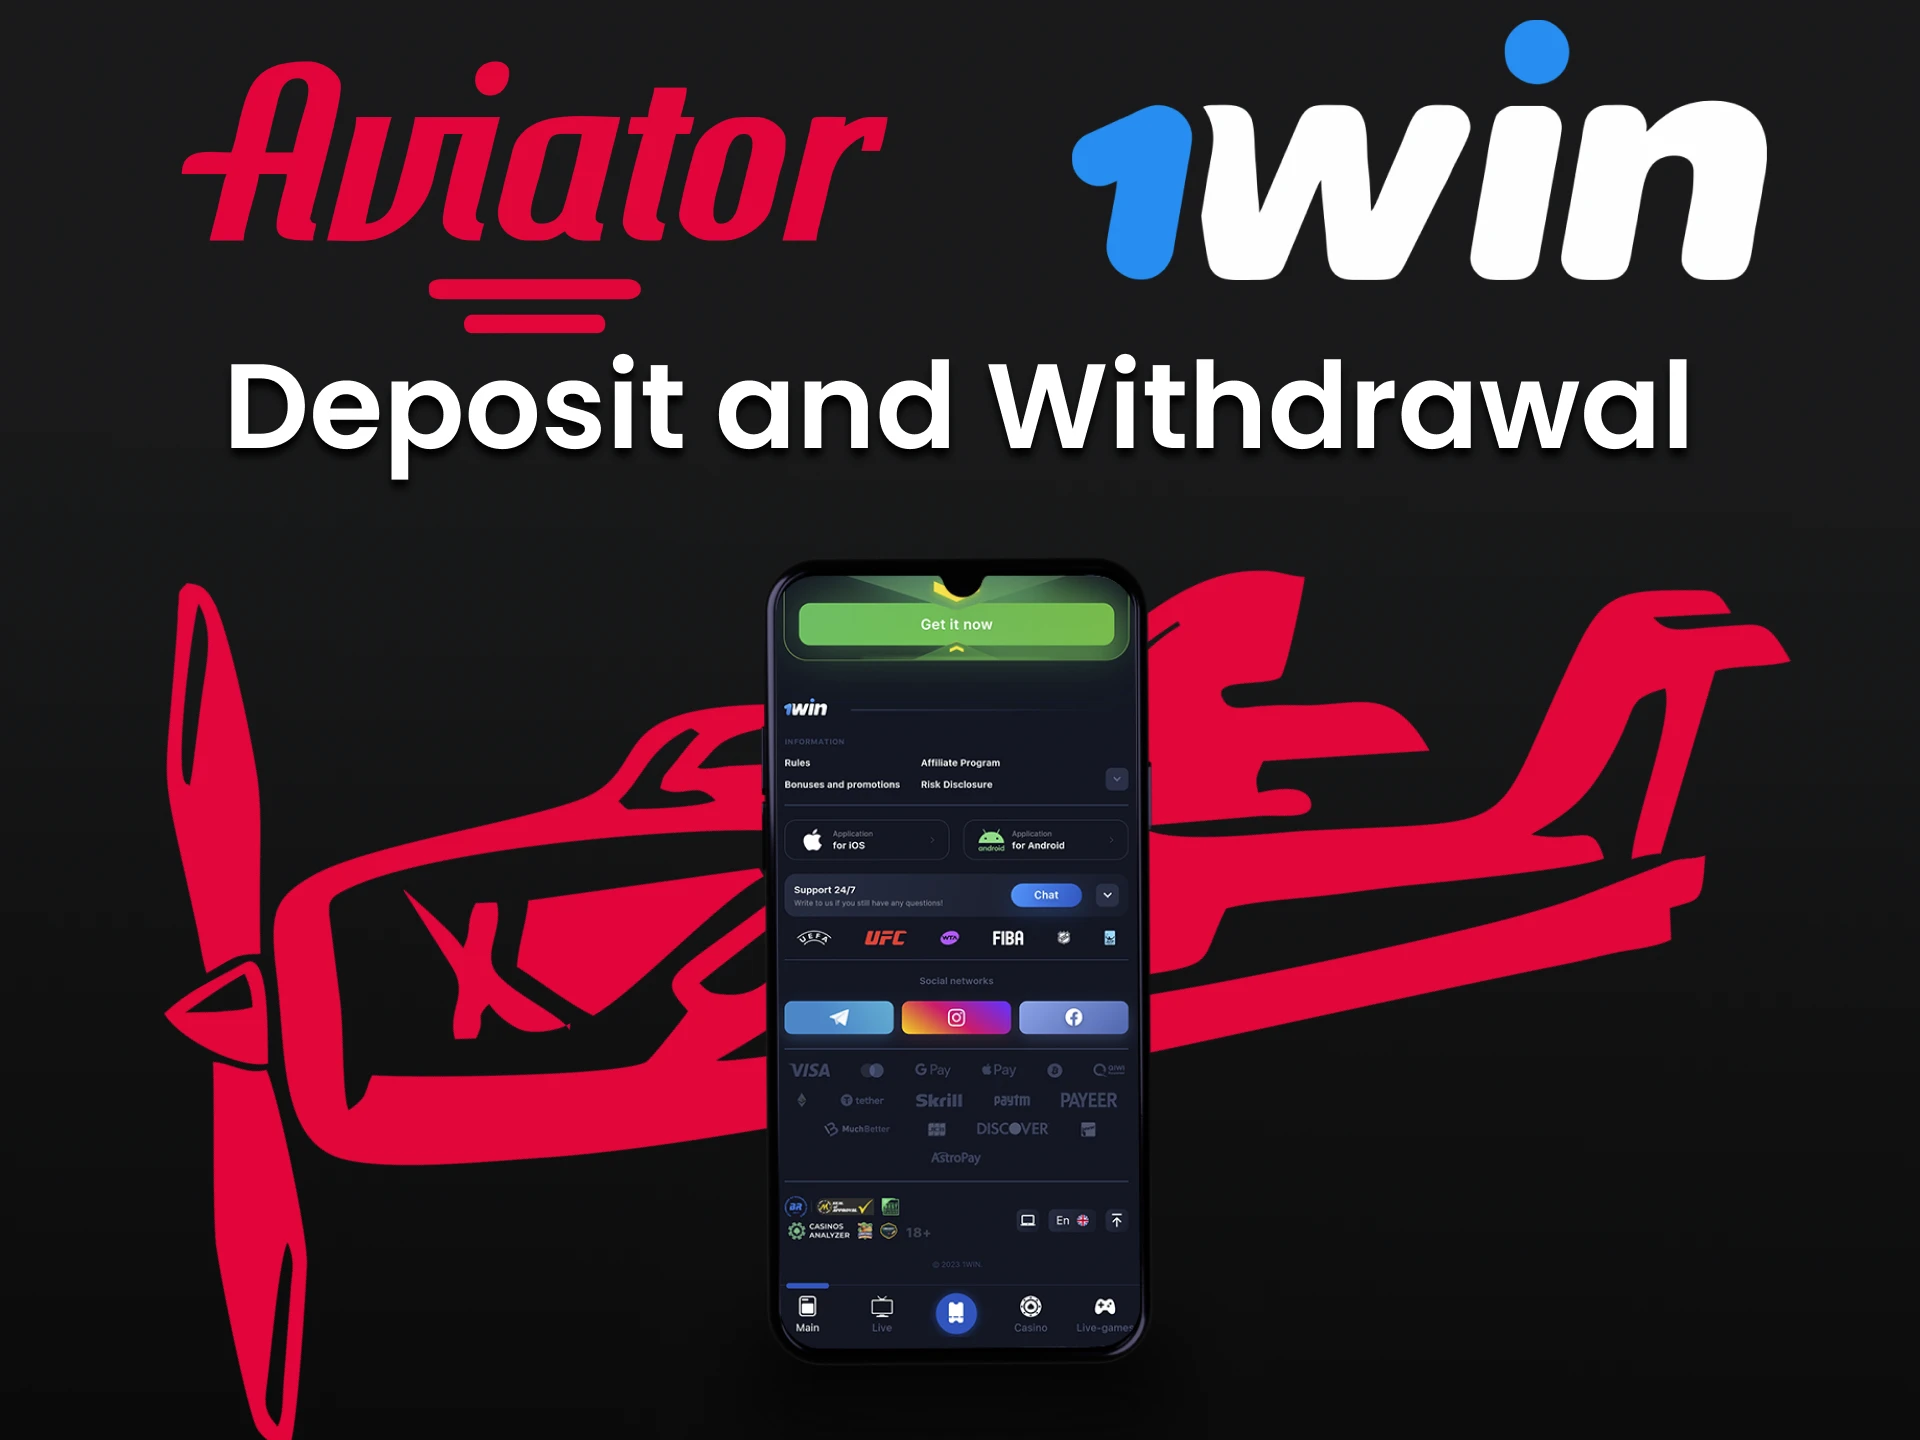 Choose a convenient way to deposit and withdraw funds from 1win.